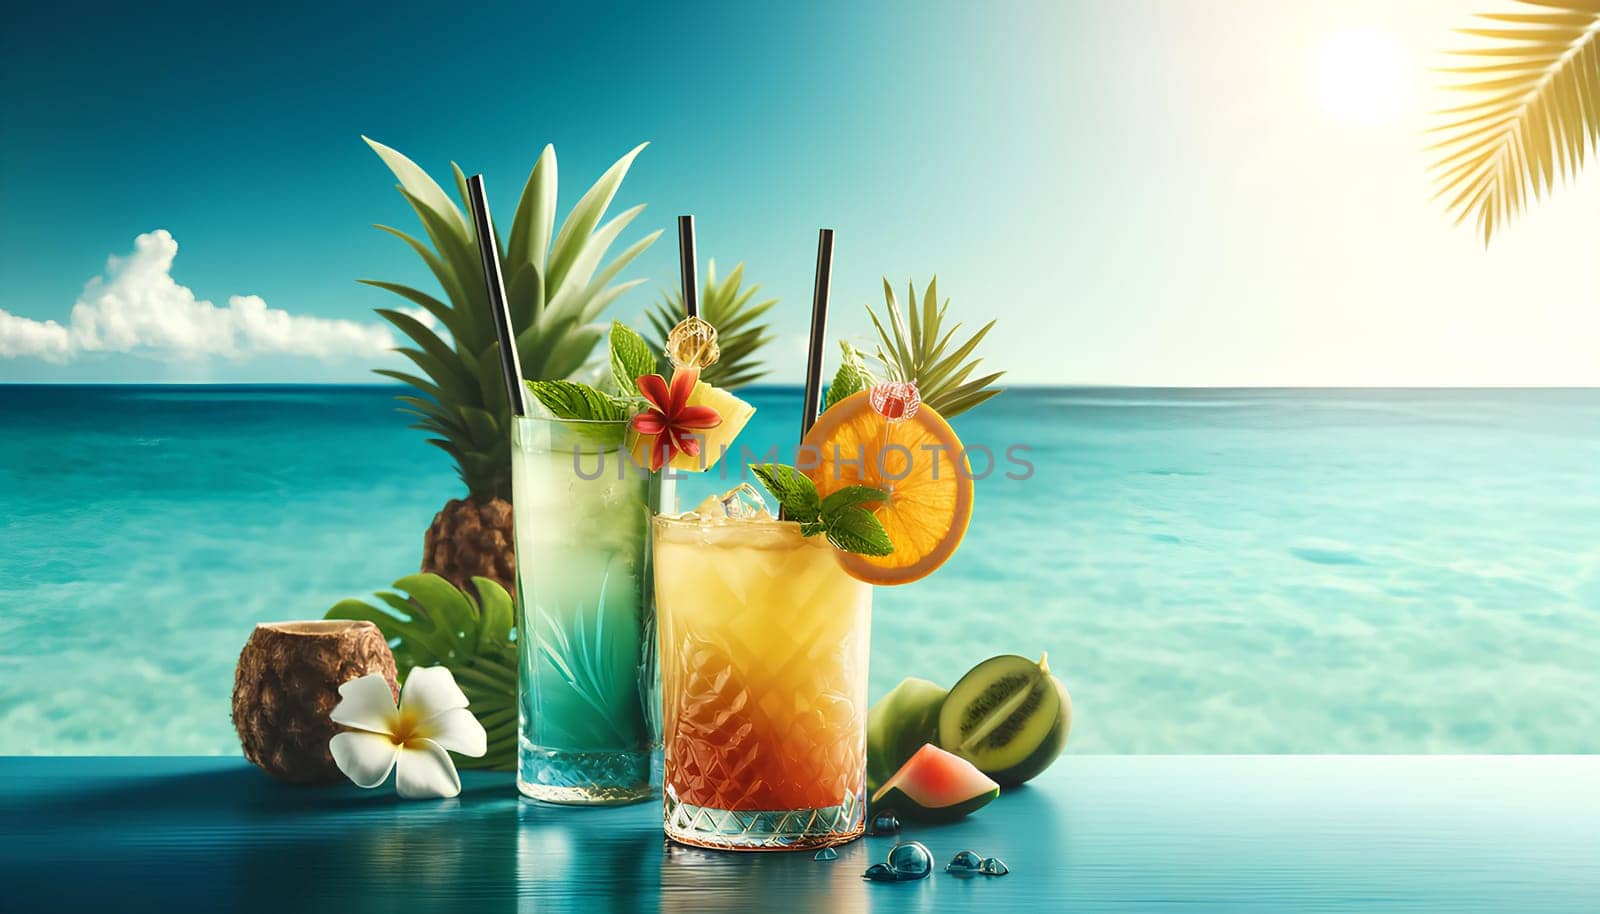 Two beautiful decorated tropical cocktails, pineapple and kiwi against the ocean skyline on a sunny day by Annado